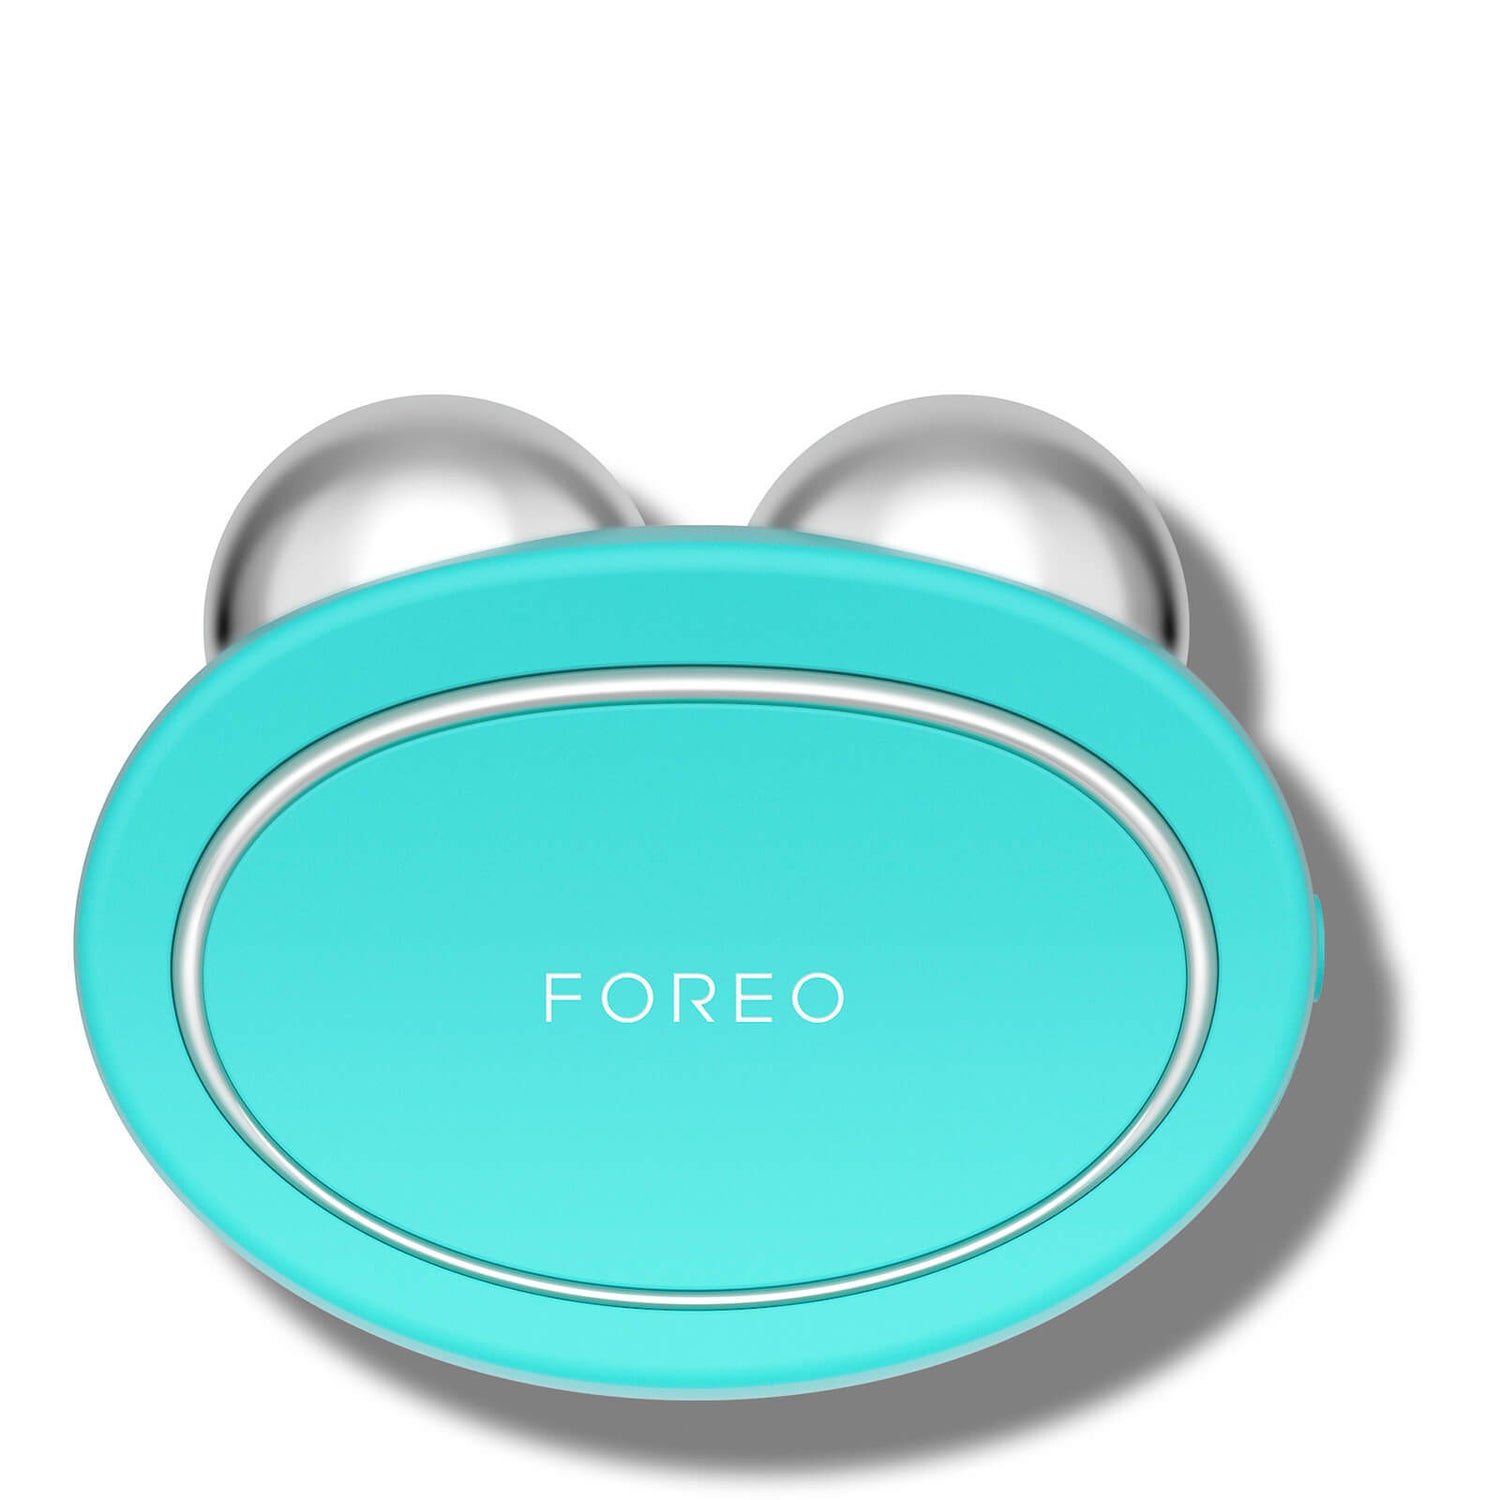 FOREO Bear Microcurrent Facial Toning Device With 5 Intensities (Various Shades)